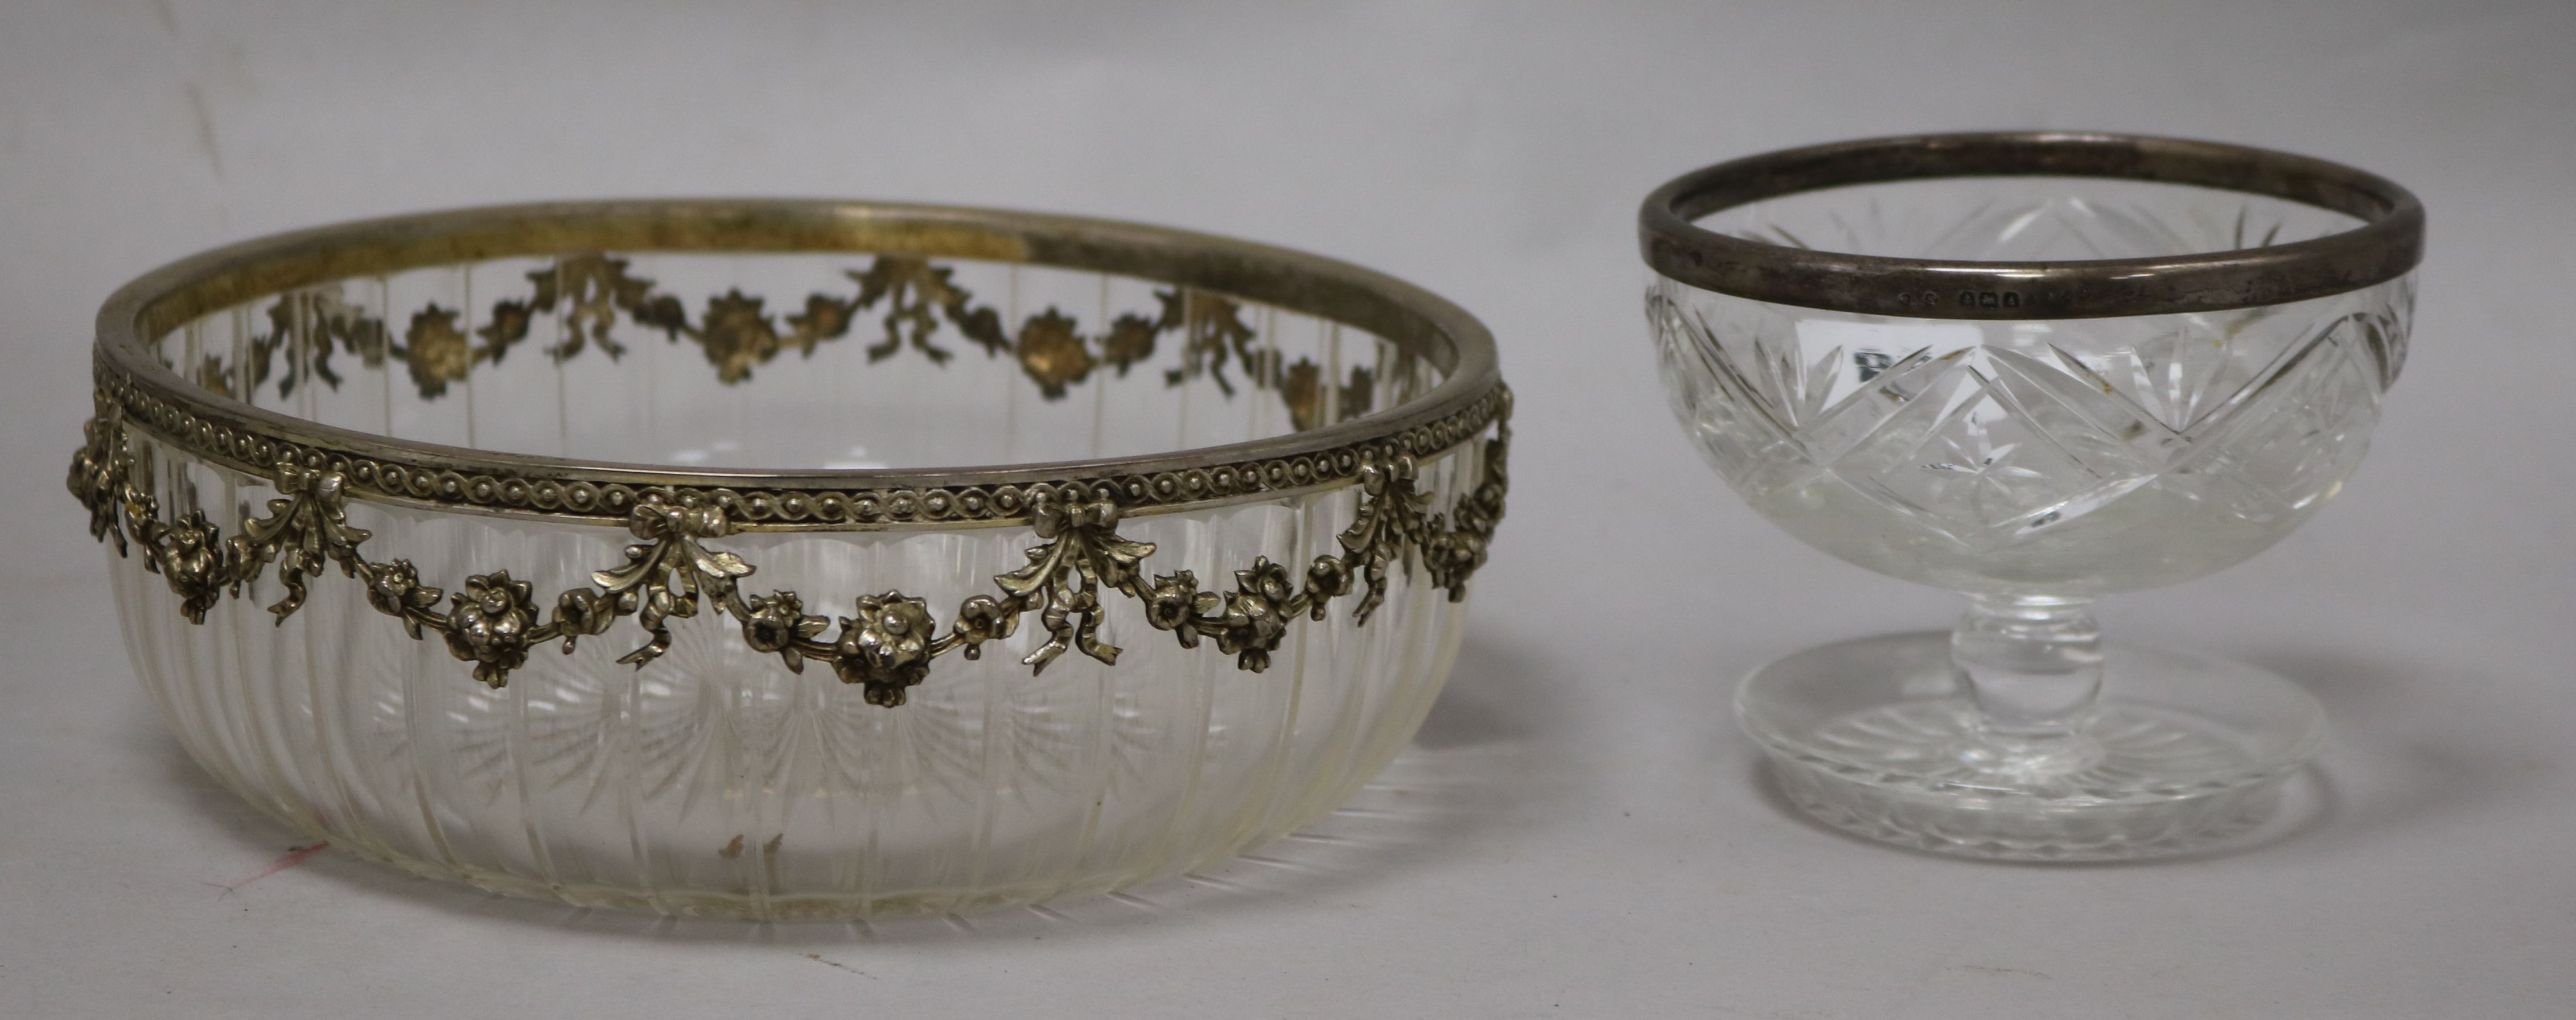 Two silver rimmed glass bowls Diam 21cm - Image 2 of 2